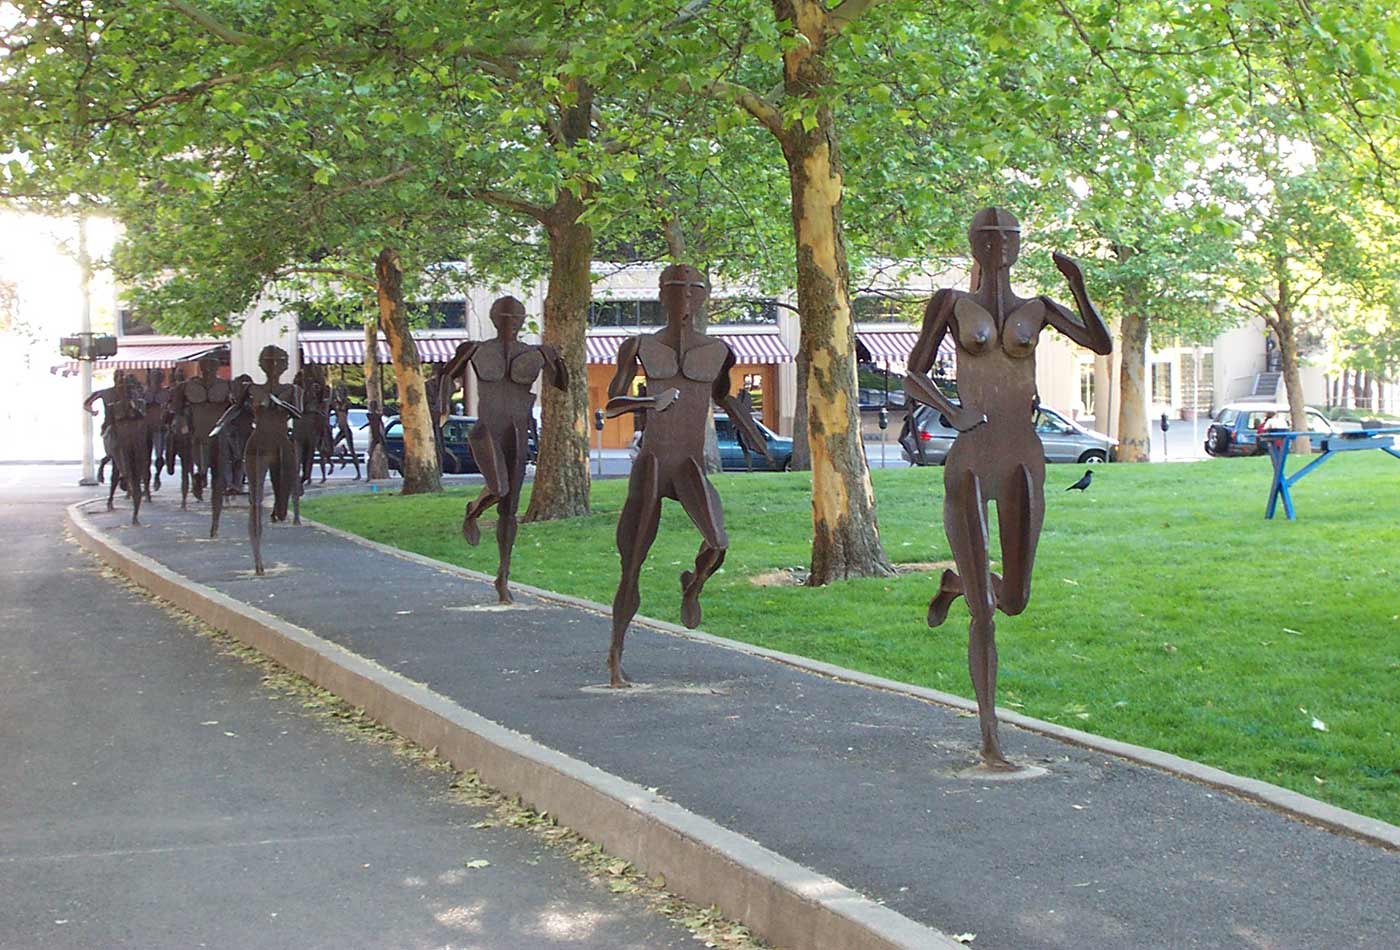 "The Joy of Running Together," a public work of art in honor of the annual Spokane Bloomsday Run.